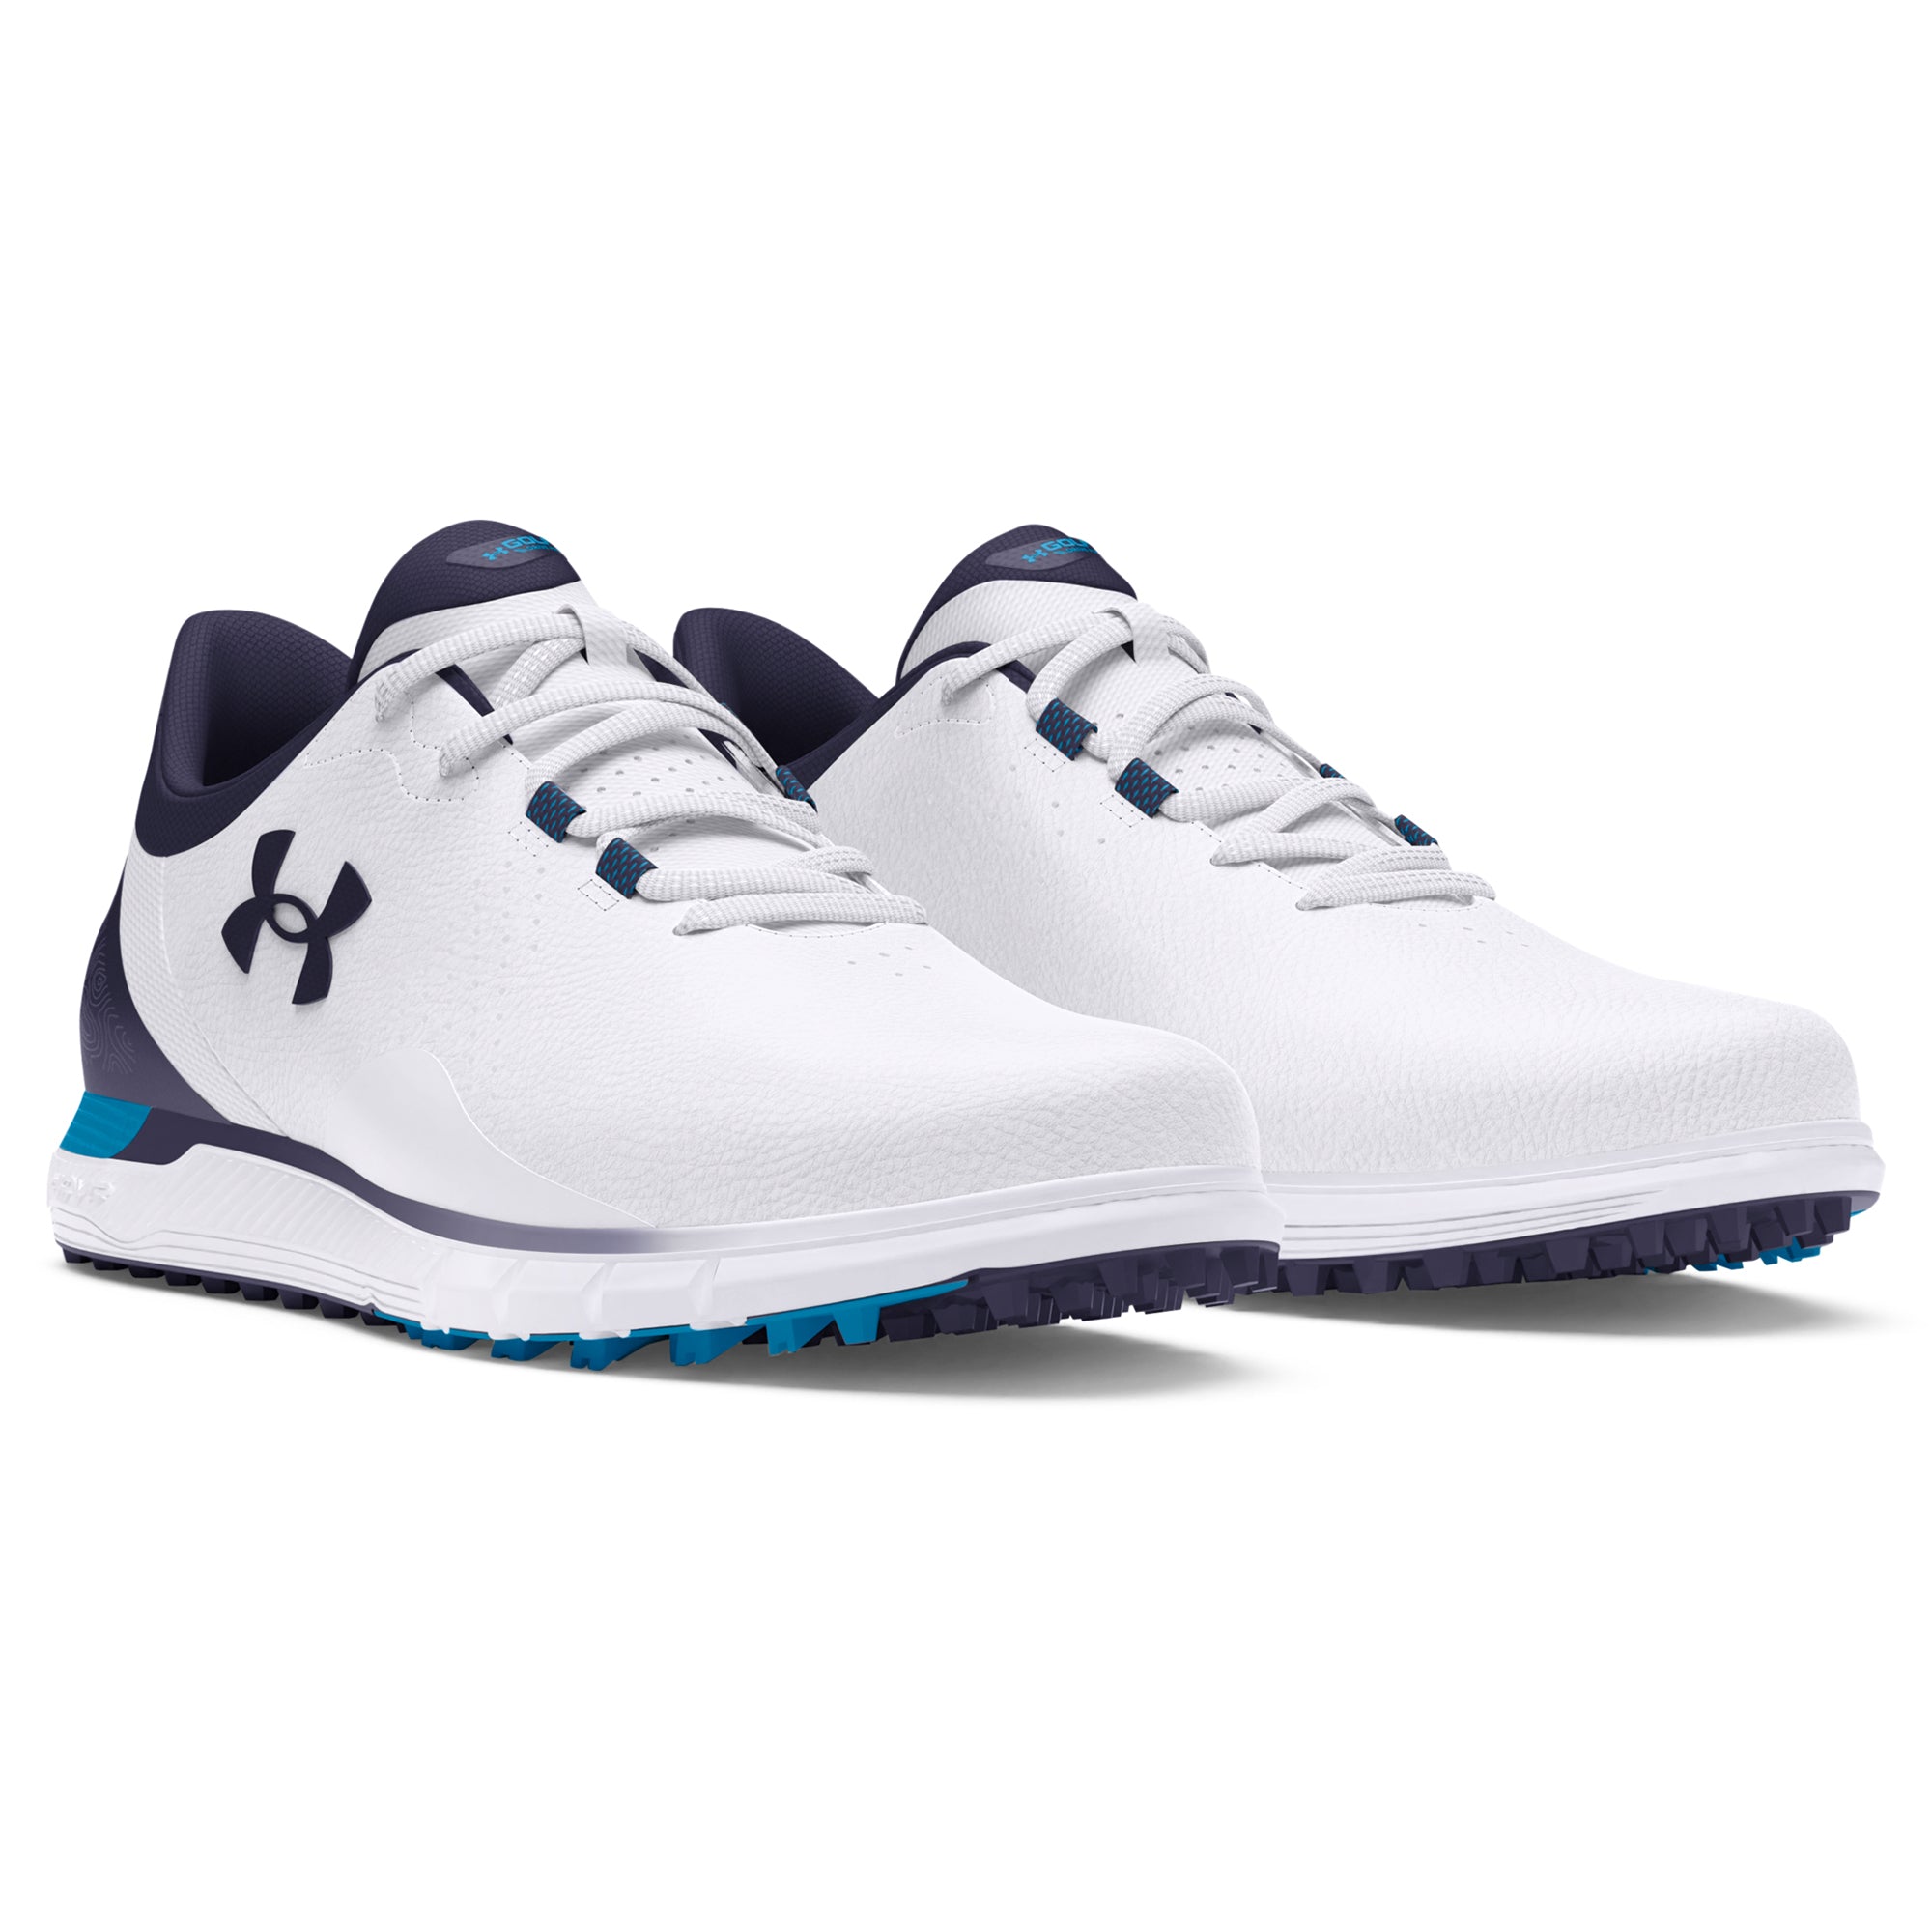 under-armour-drive-fade-sl-golf-shoes-3026922-white-capri-midnight-navy-101